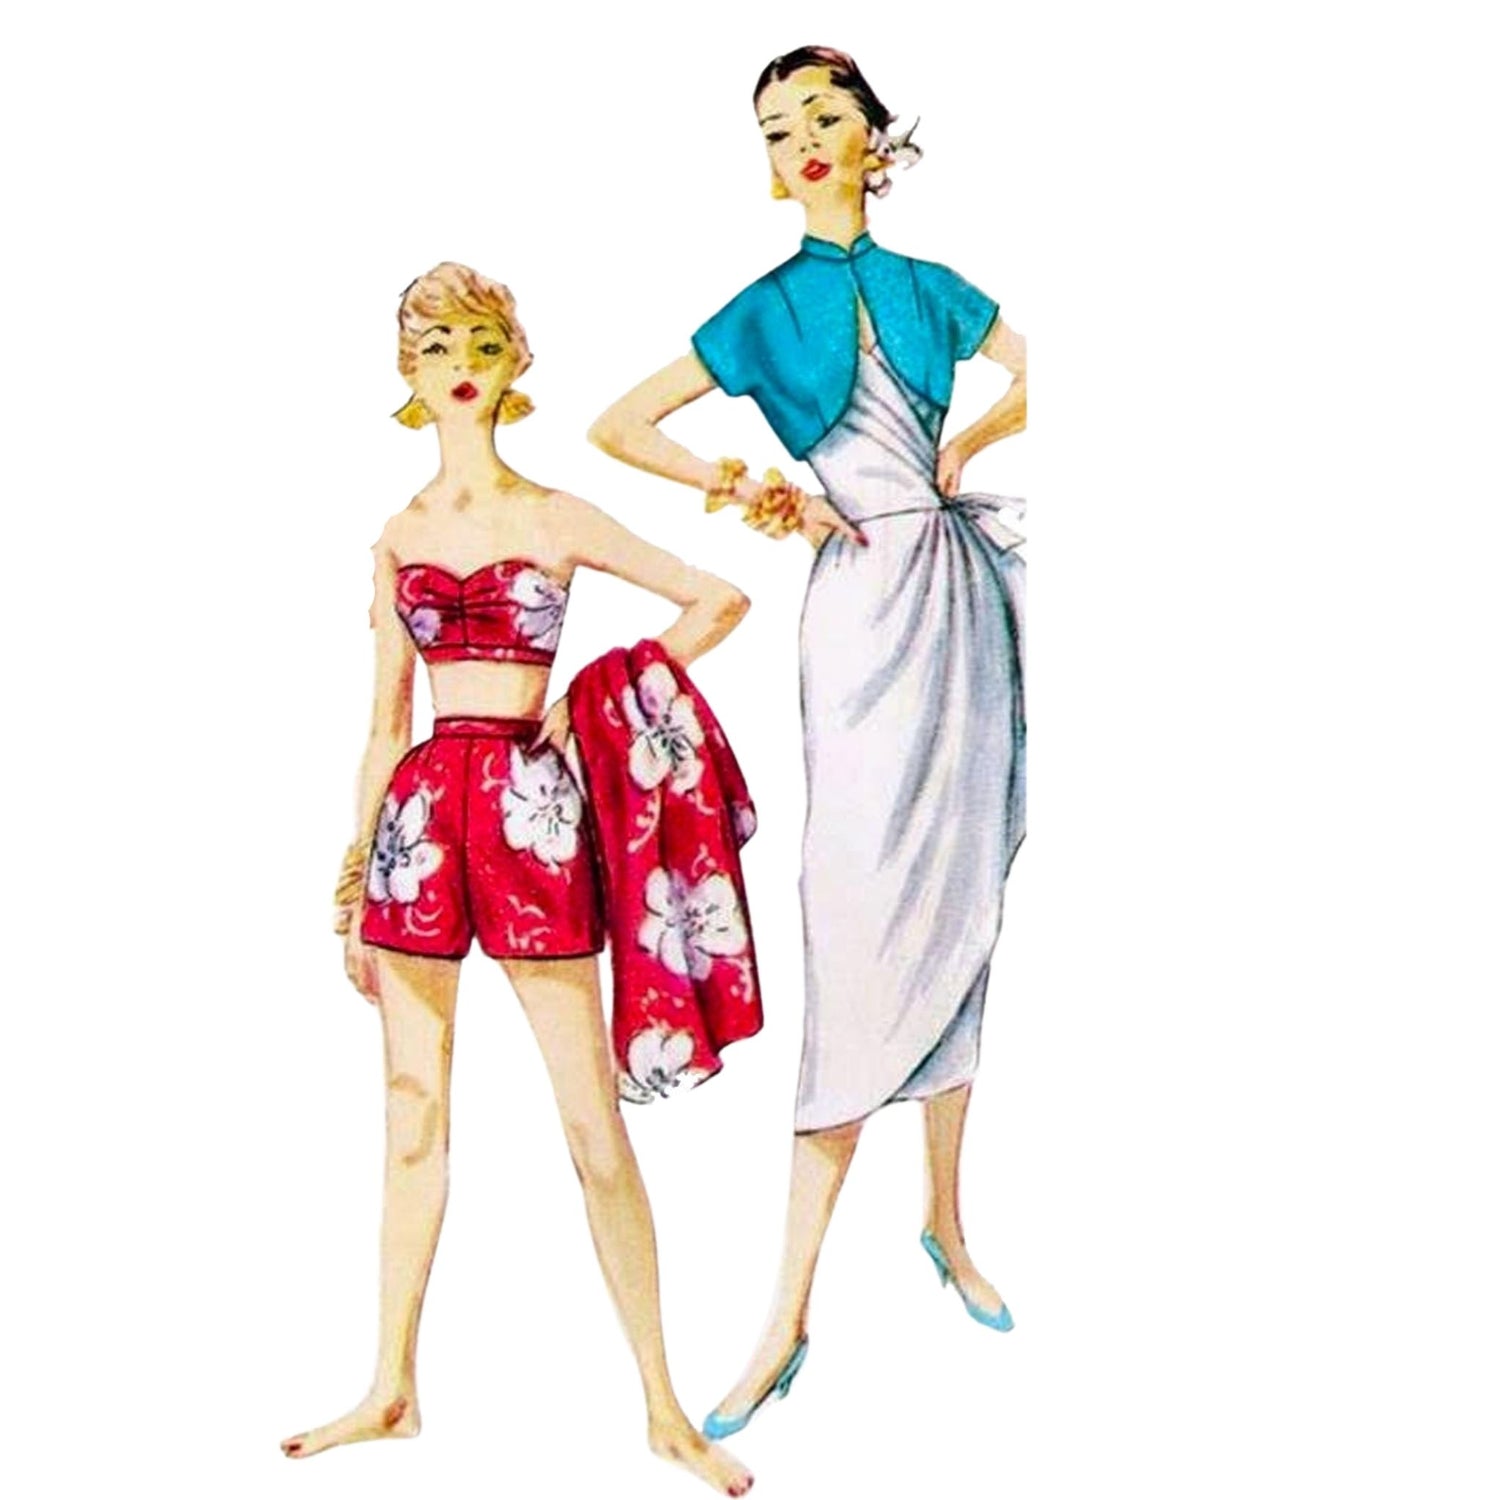 10 50's attire ideas  50s fashion, 50s outfit, 50s outfits